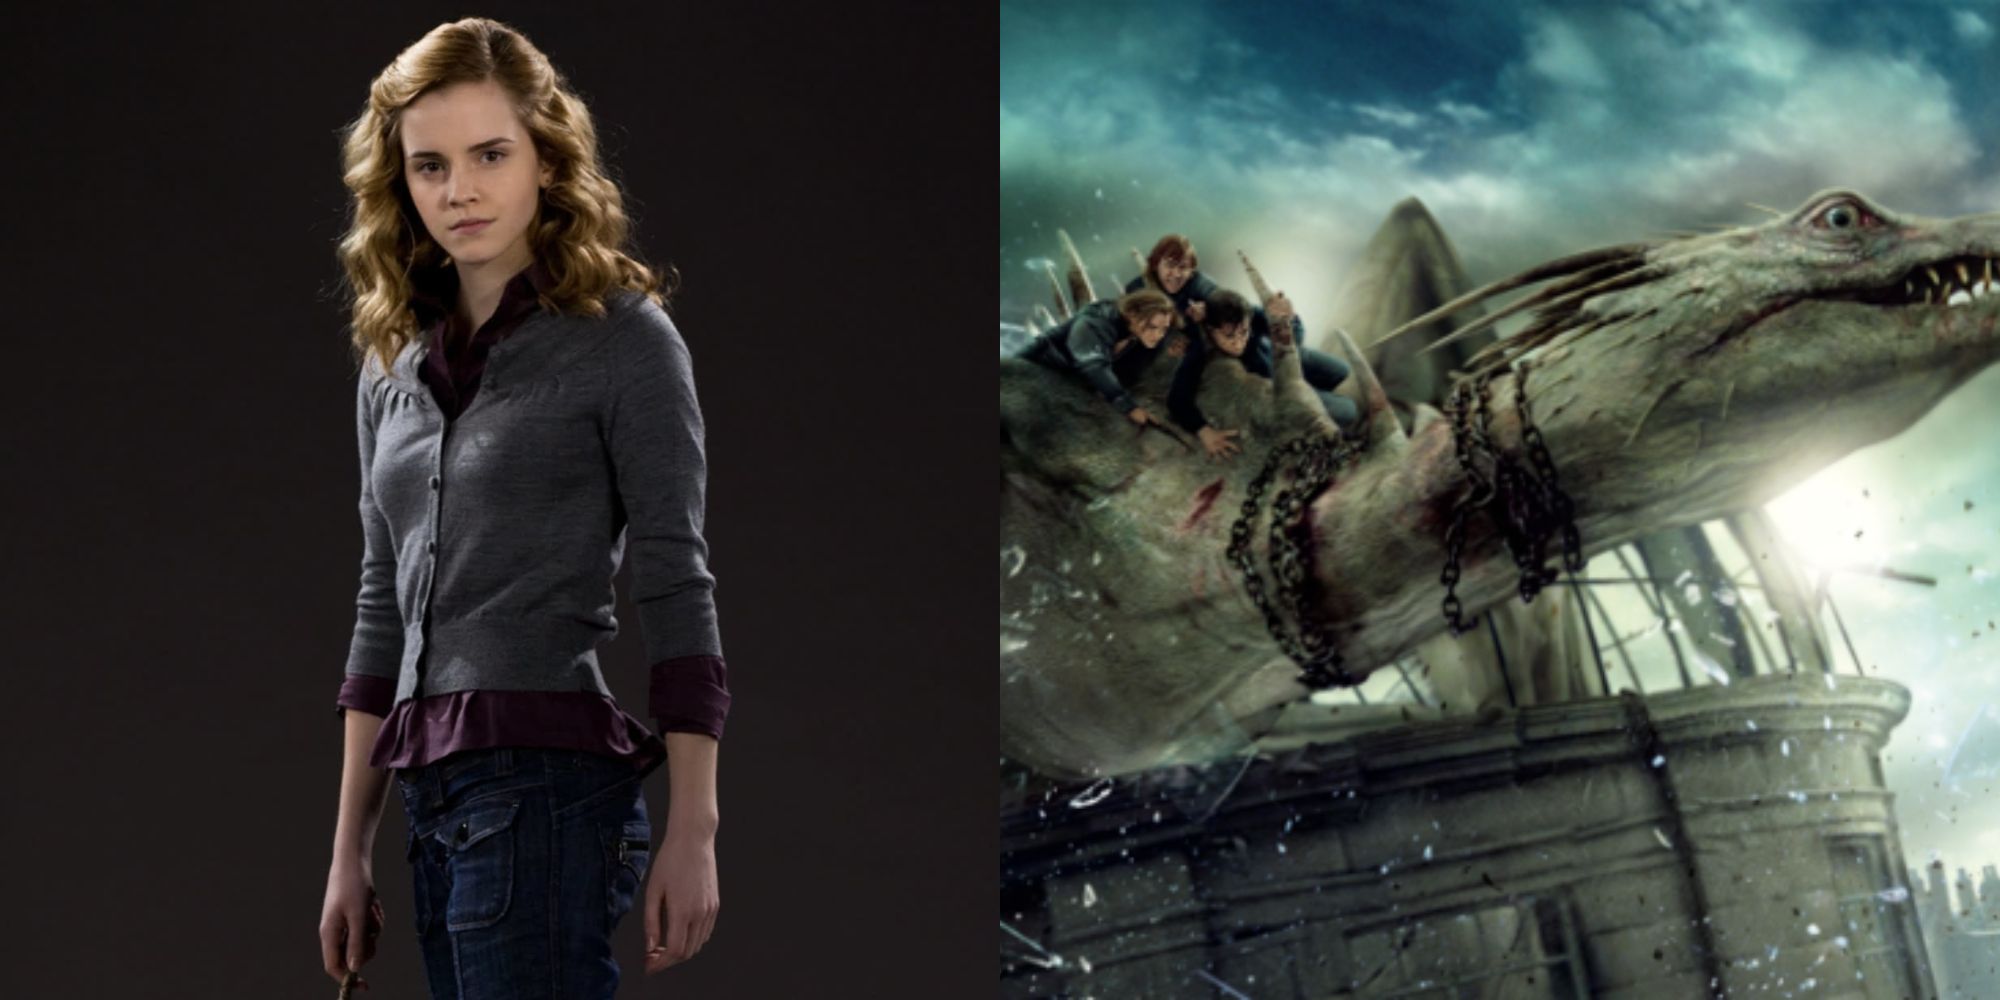 Split image showing Hermione and the Gringotts dragon in Harry Potter-